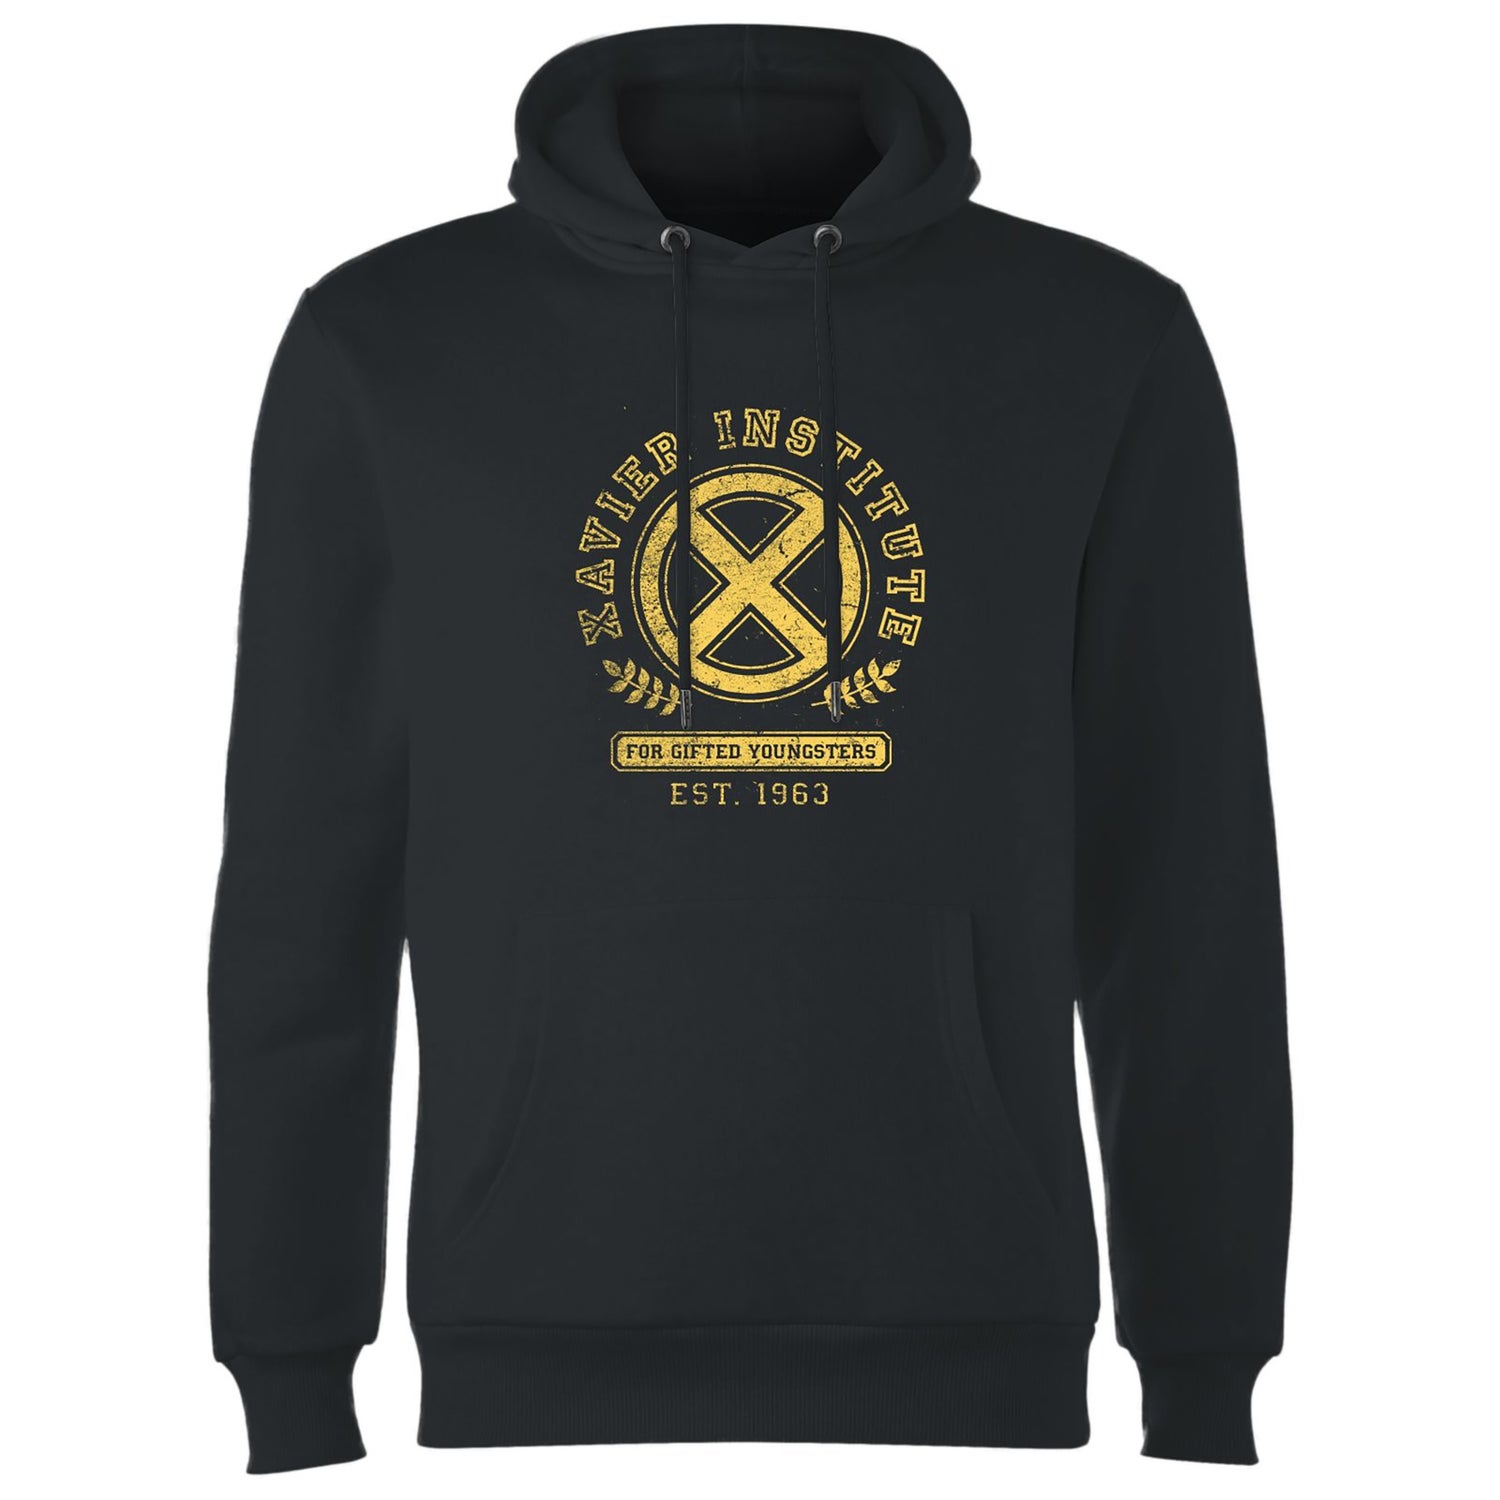 X-Men Xavier Institute For Gifted Youngsters Hoodie - Black